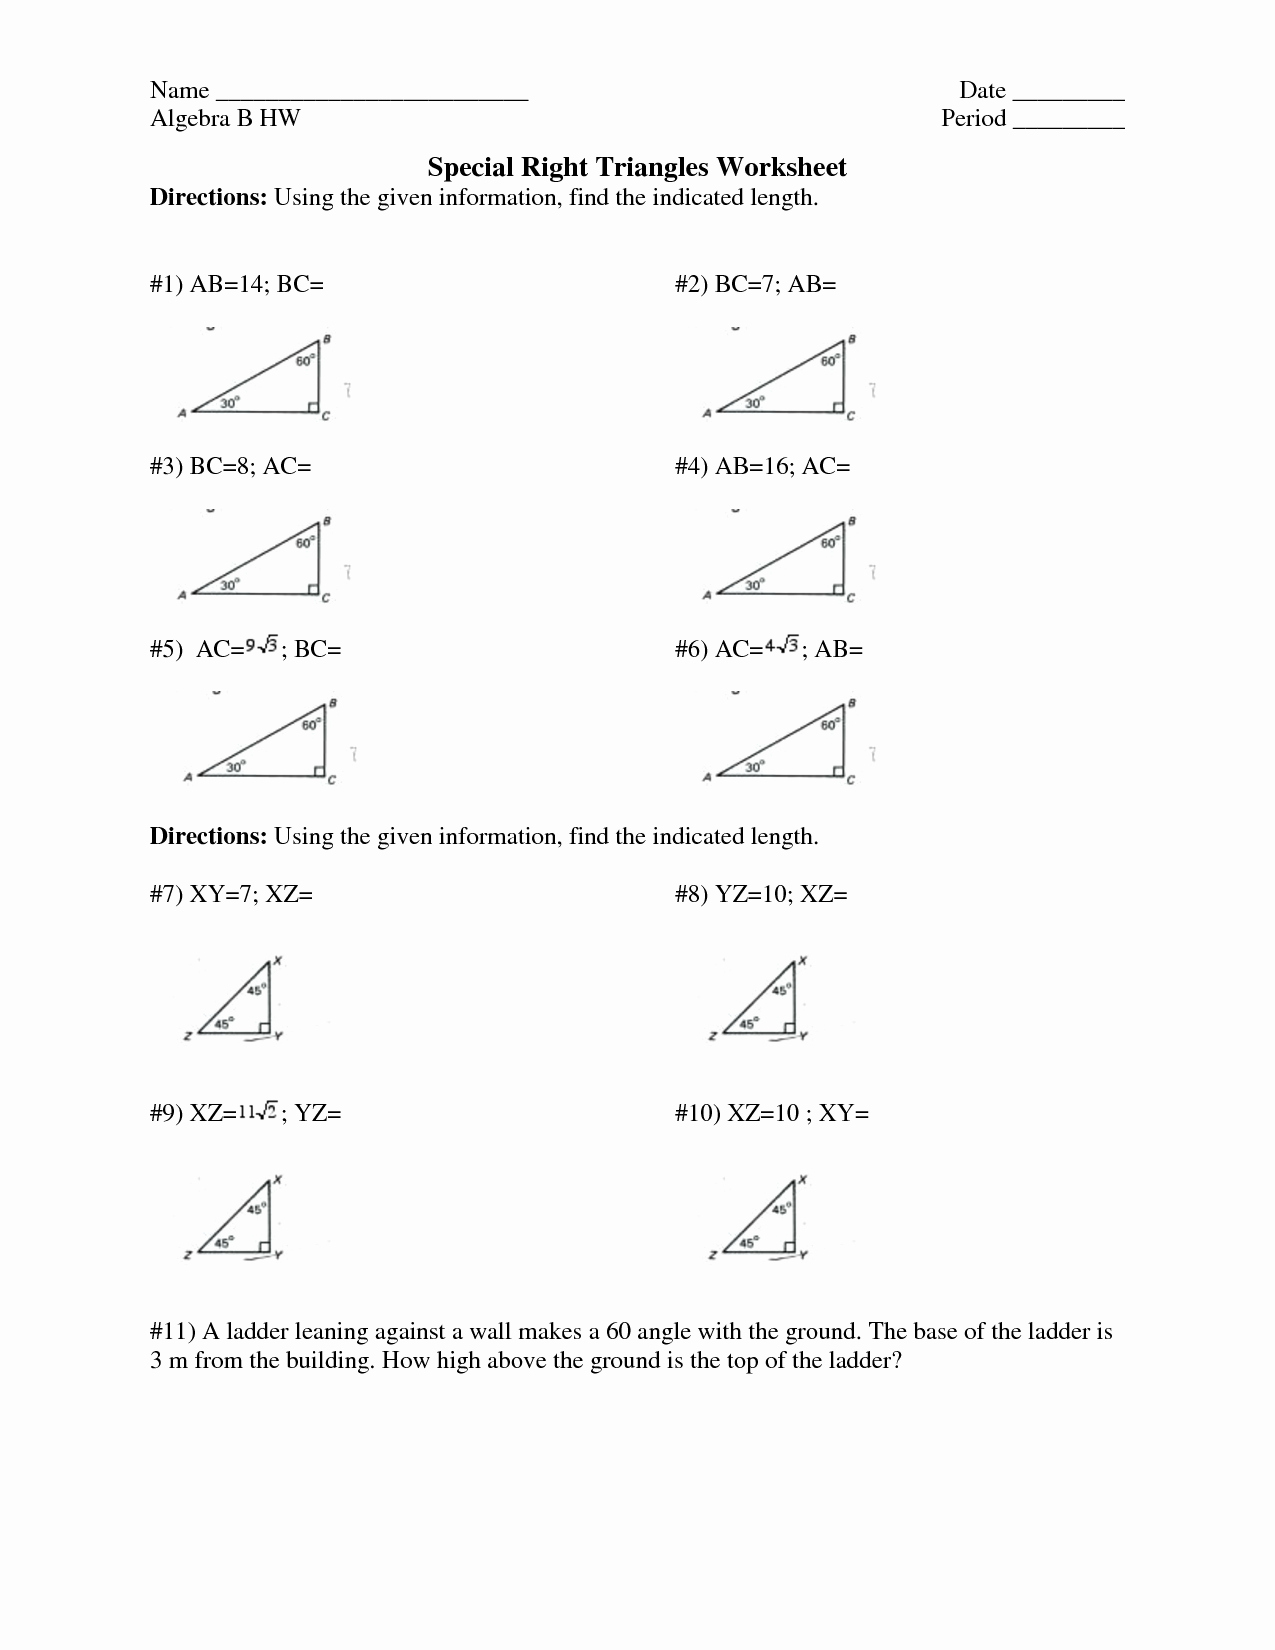 Special Right Triangles Worksheet Unique Special Right Triangles Worksheets